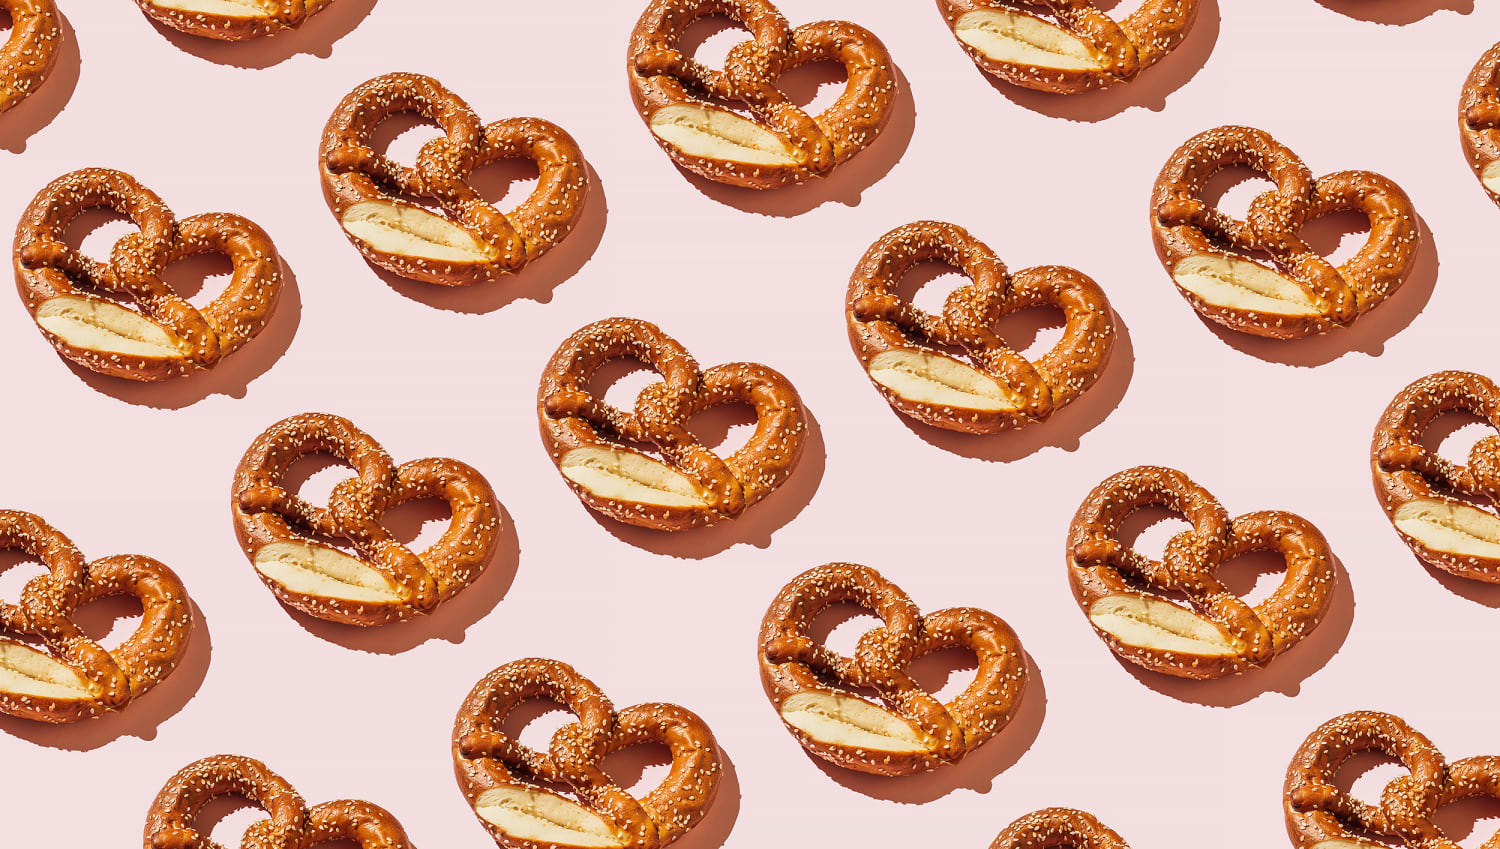 12 National Pretzel Day deals that won't leave you feeling salty